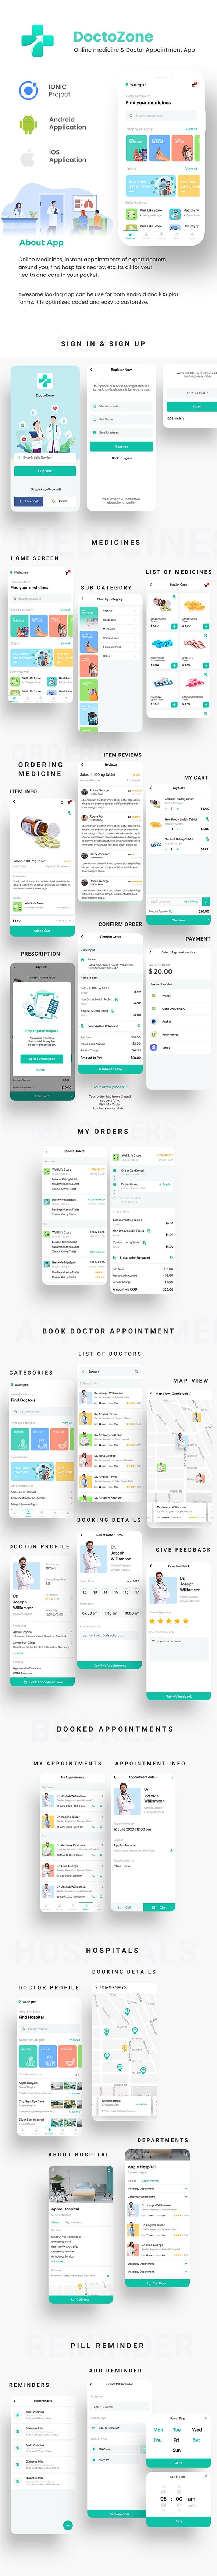 Nearby Doctor App| Online Medicine | Doctor Appointment Booking App |Android + iOS Template| IONIC 5 - 6